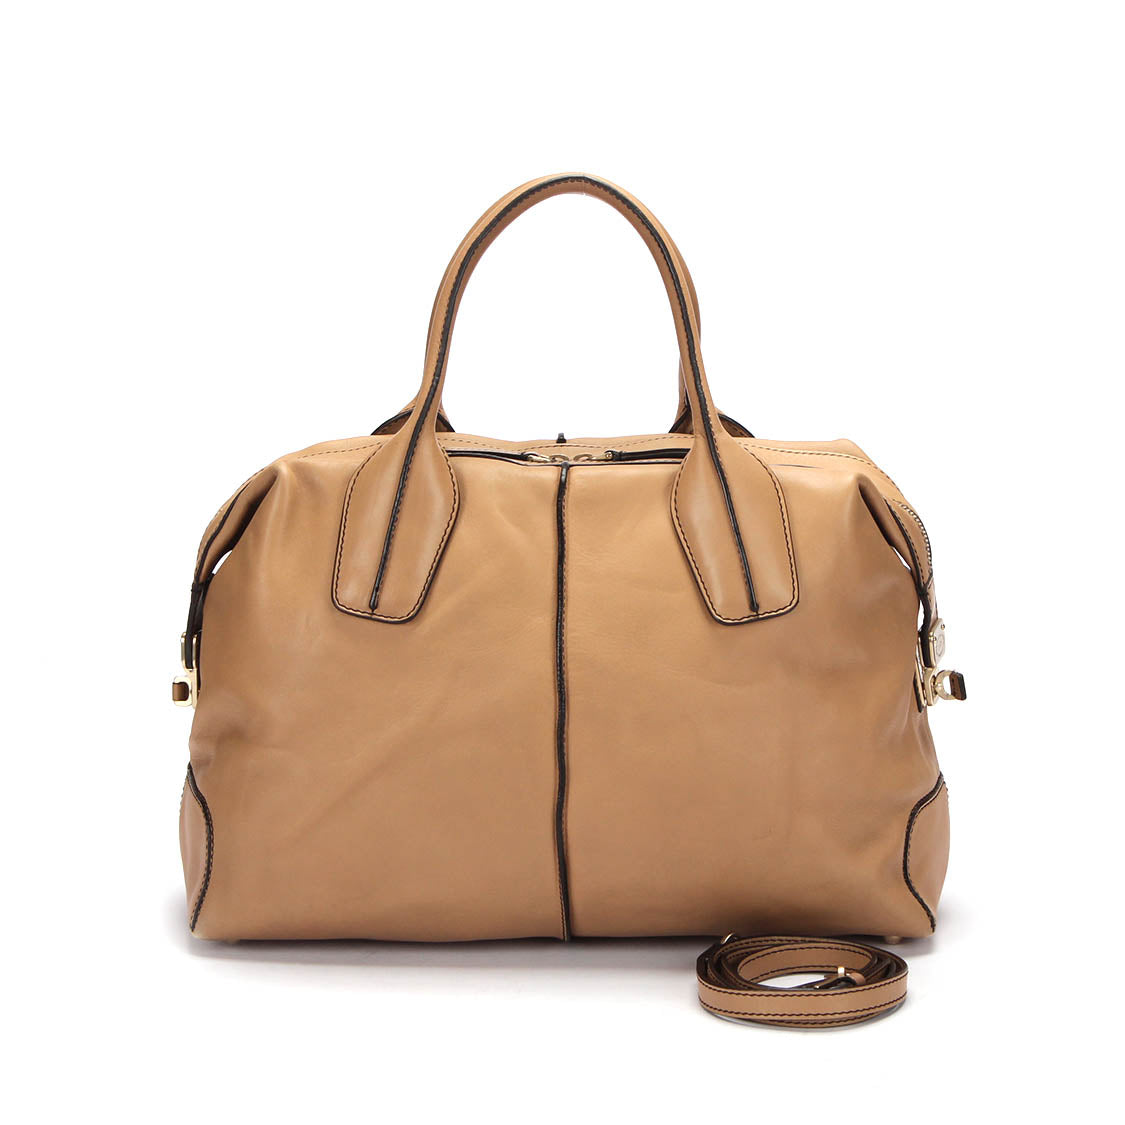 D-Styling Leather Bauletto Bag